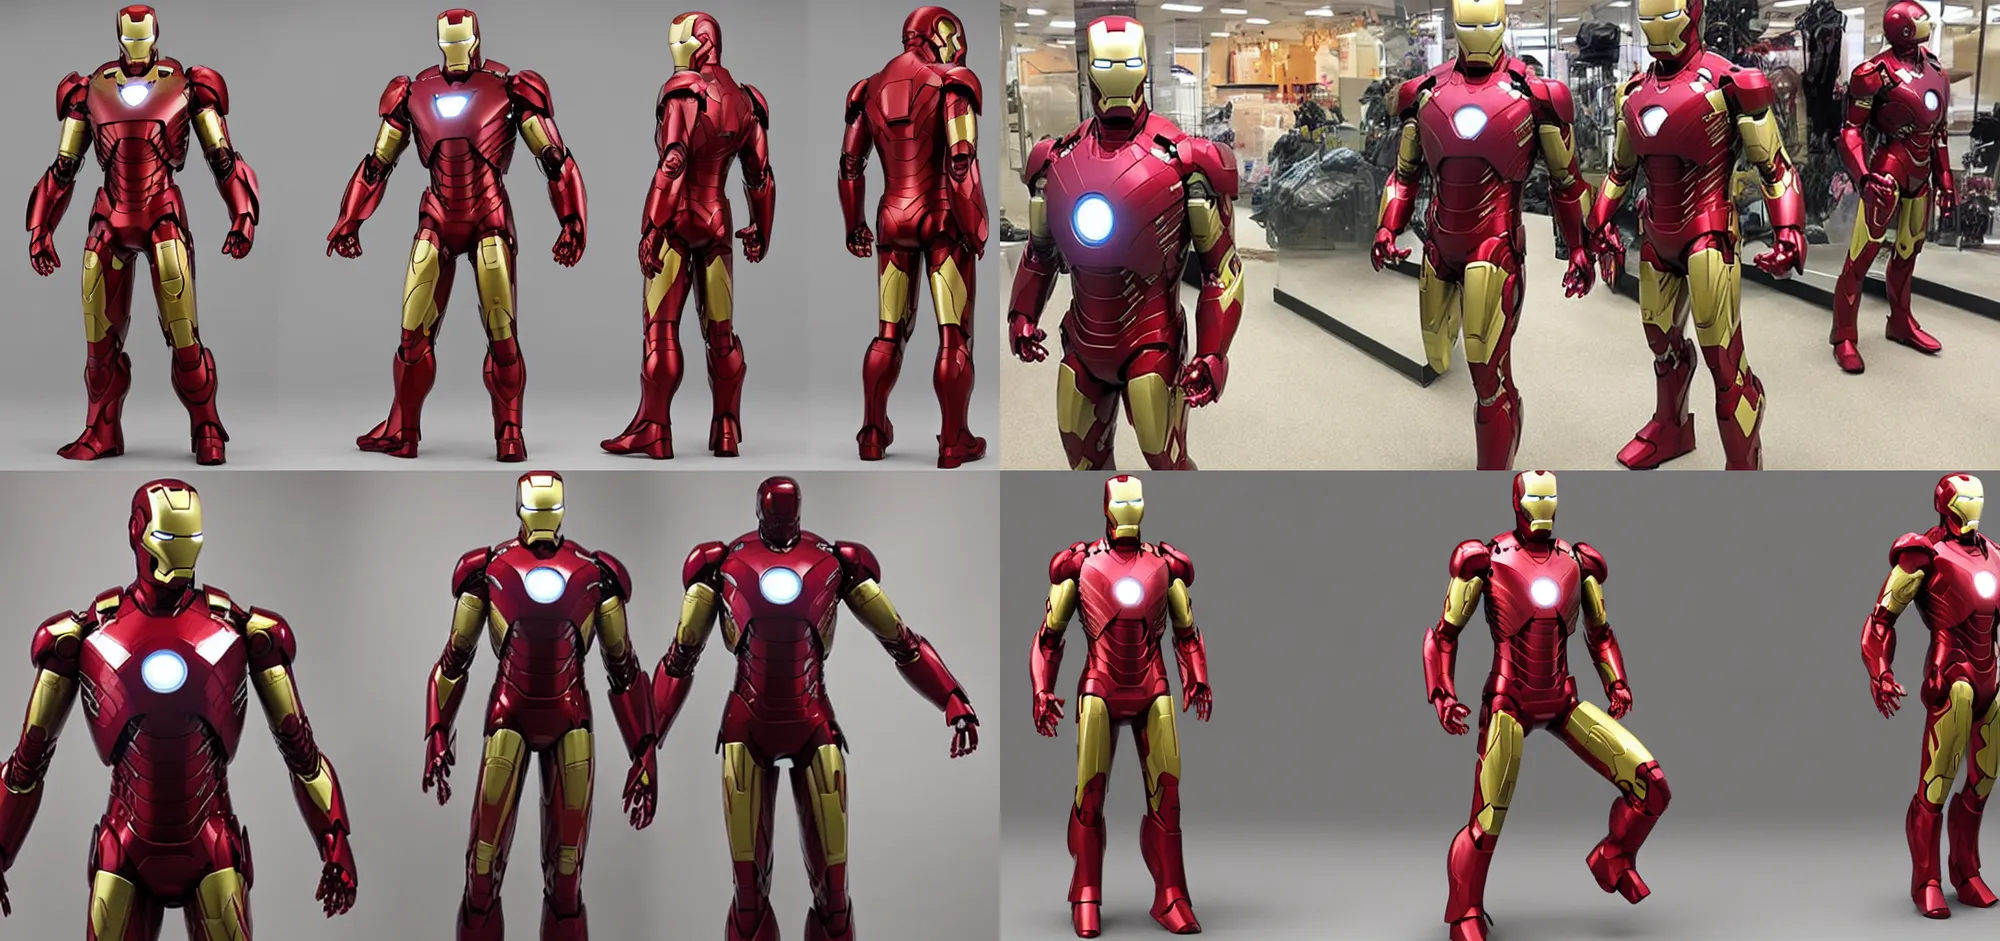 Ironman - Suit Up by LRitchieART on DeviantArt | Iron man wallpaper, Iron  man, Marvel drawings